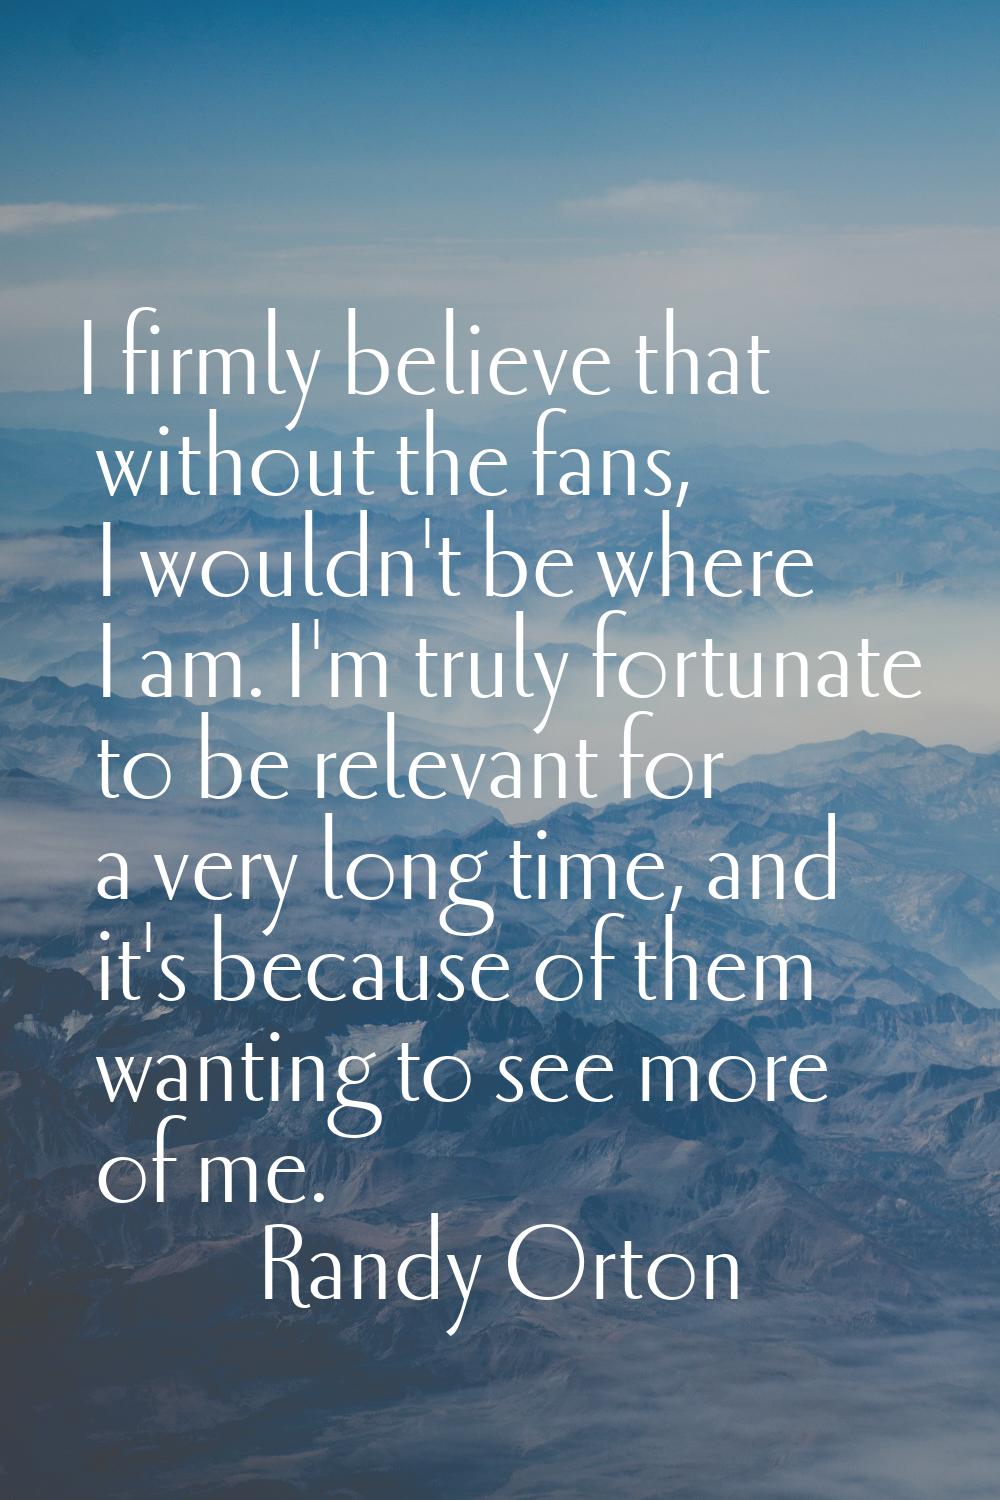 I firmly believe that without the fans, I wouldn't be where I am. I'm truly fortunate to be relevan